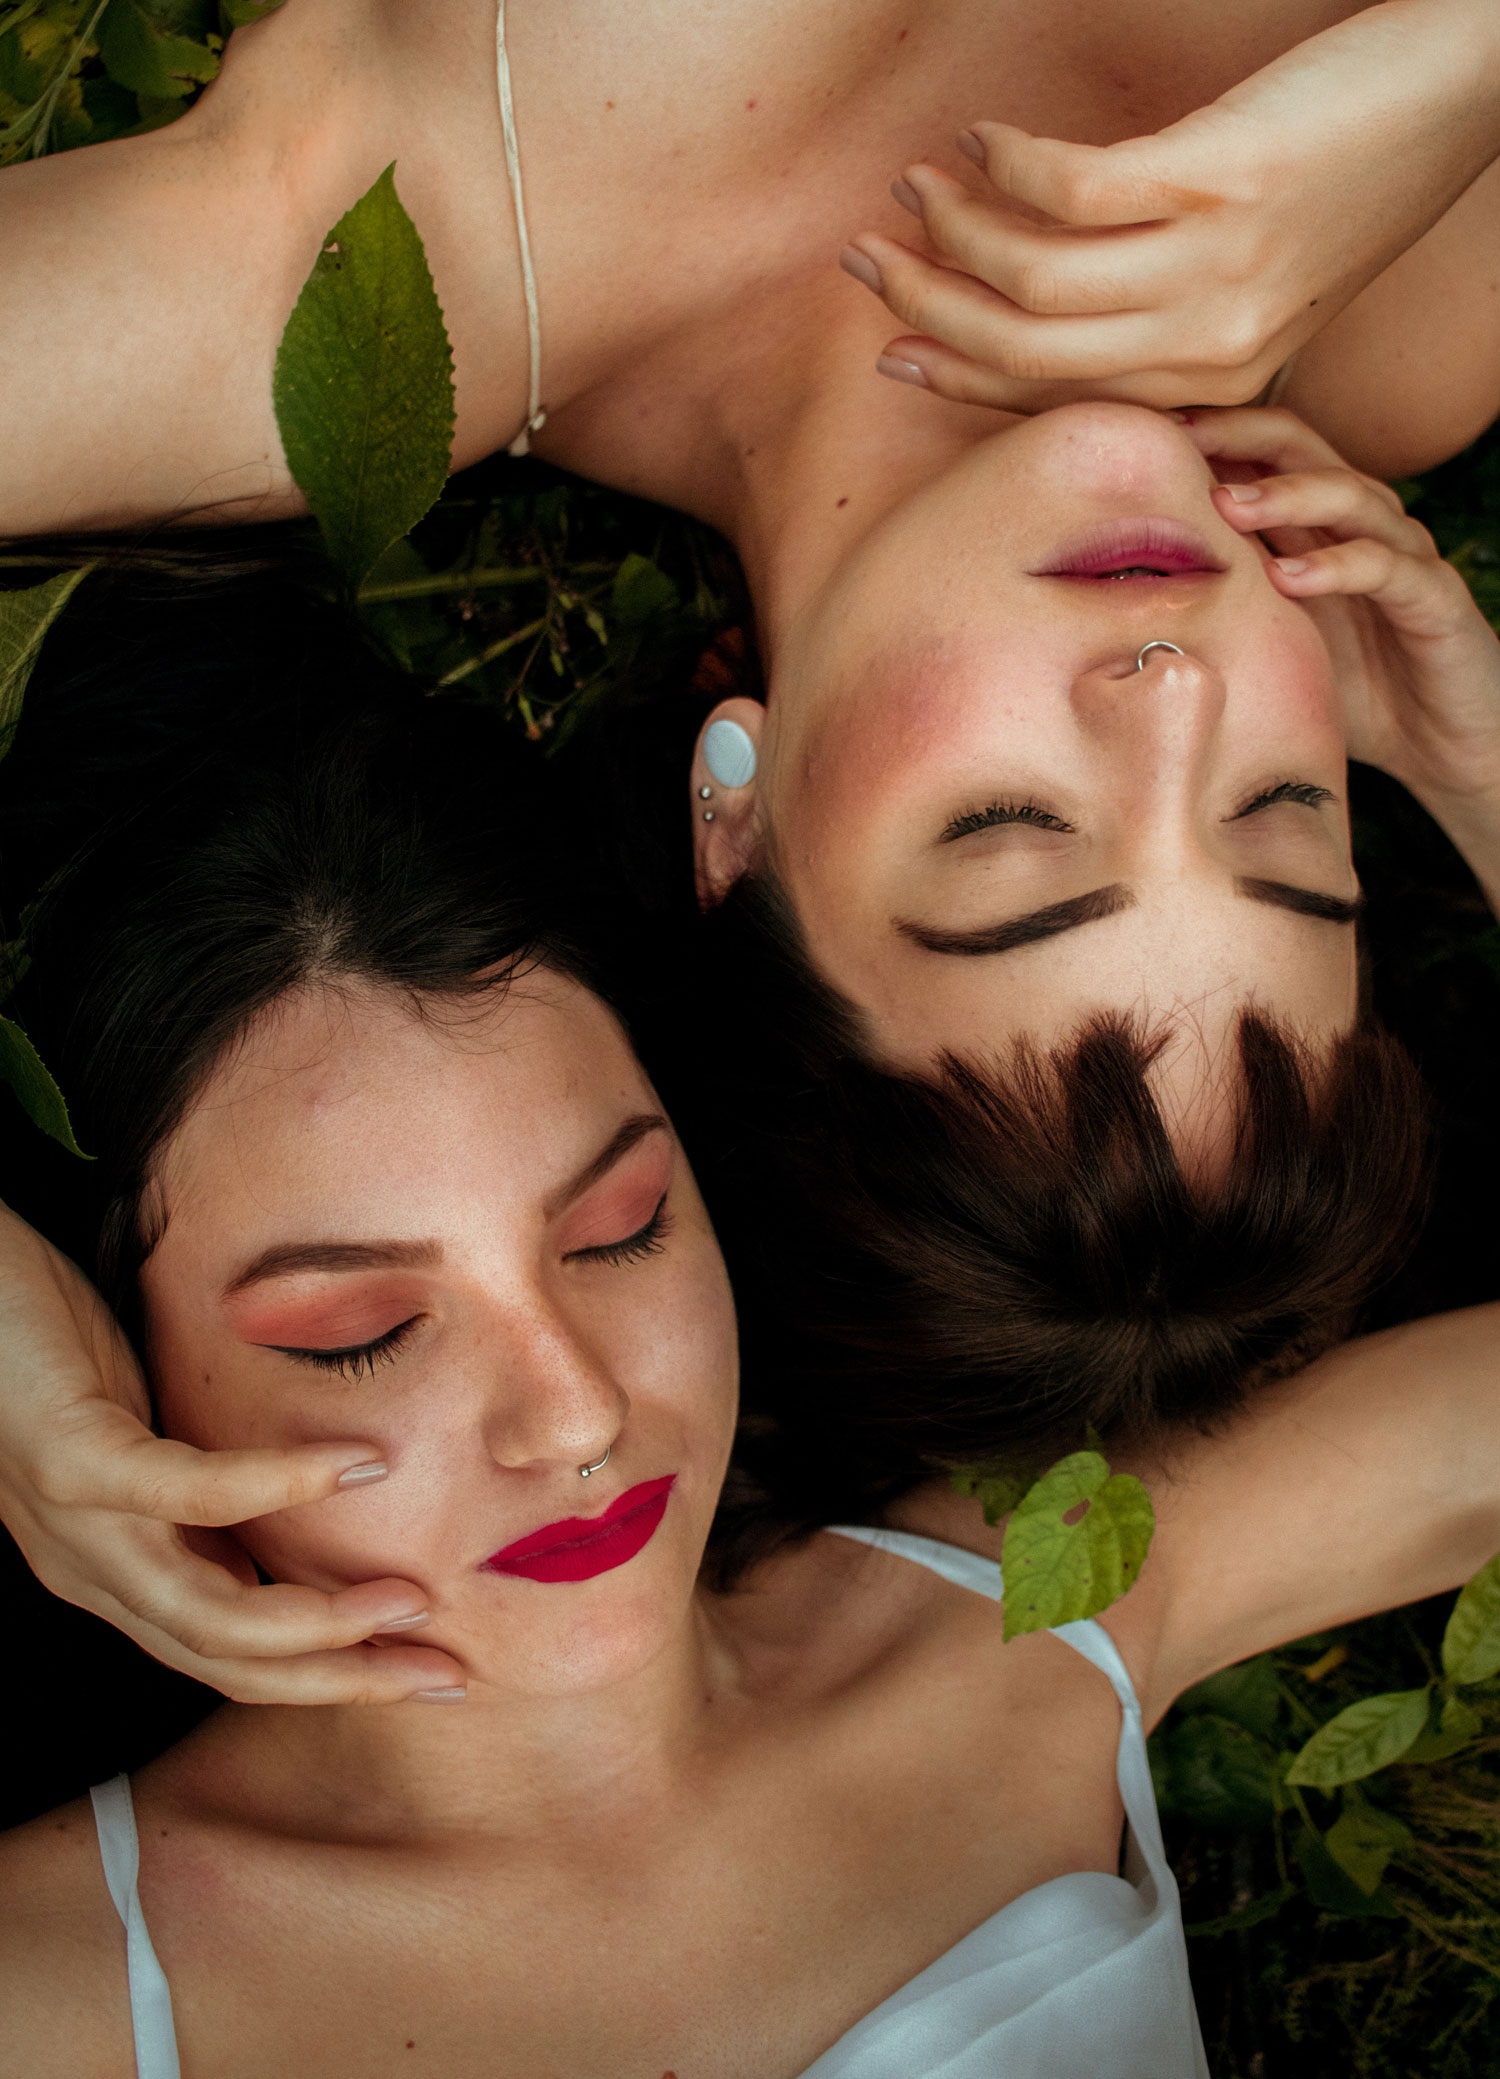 Two young women laying next to each other with pierced noses and ears